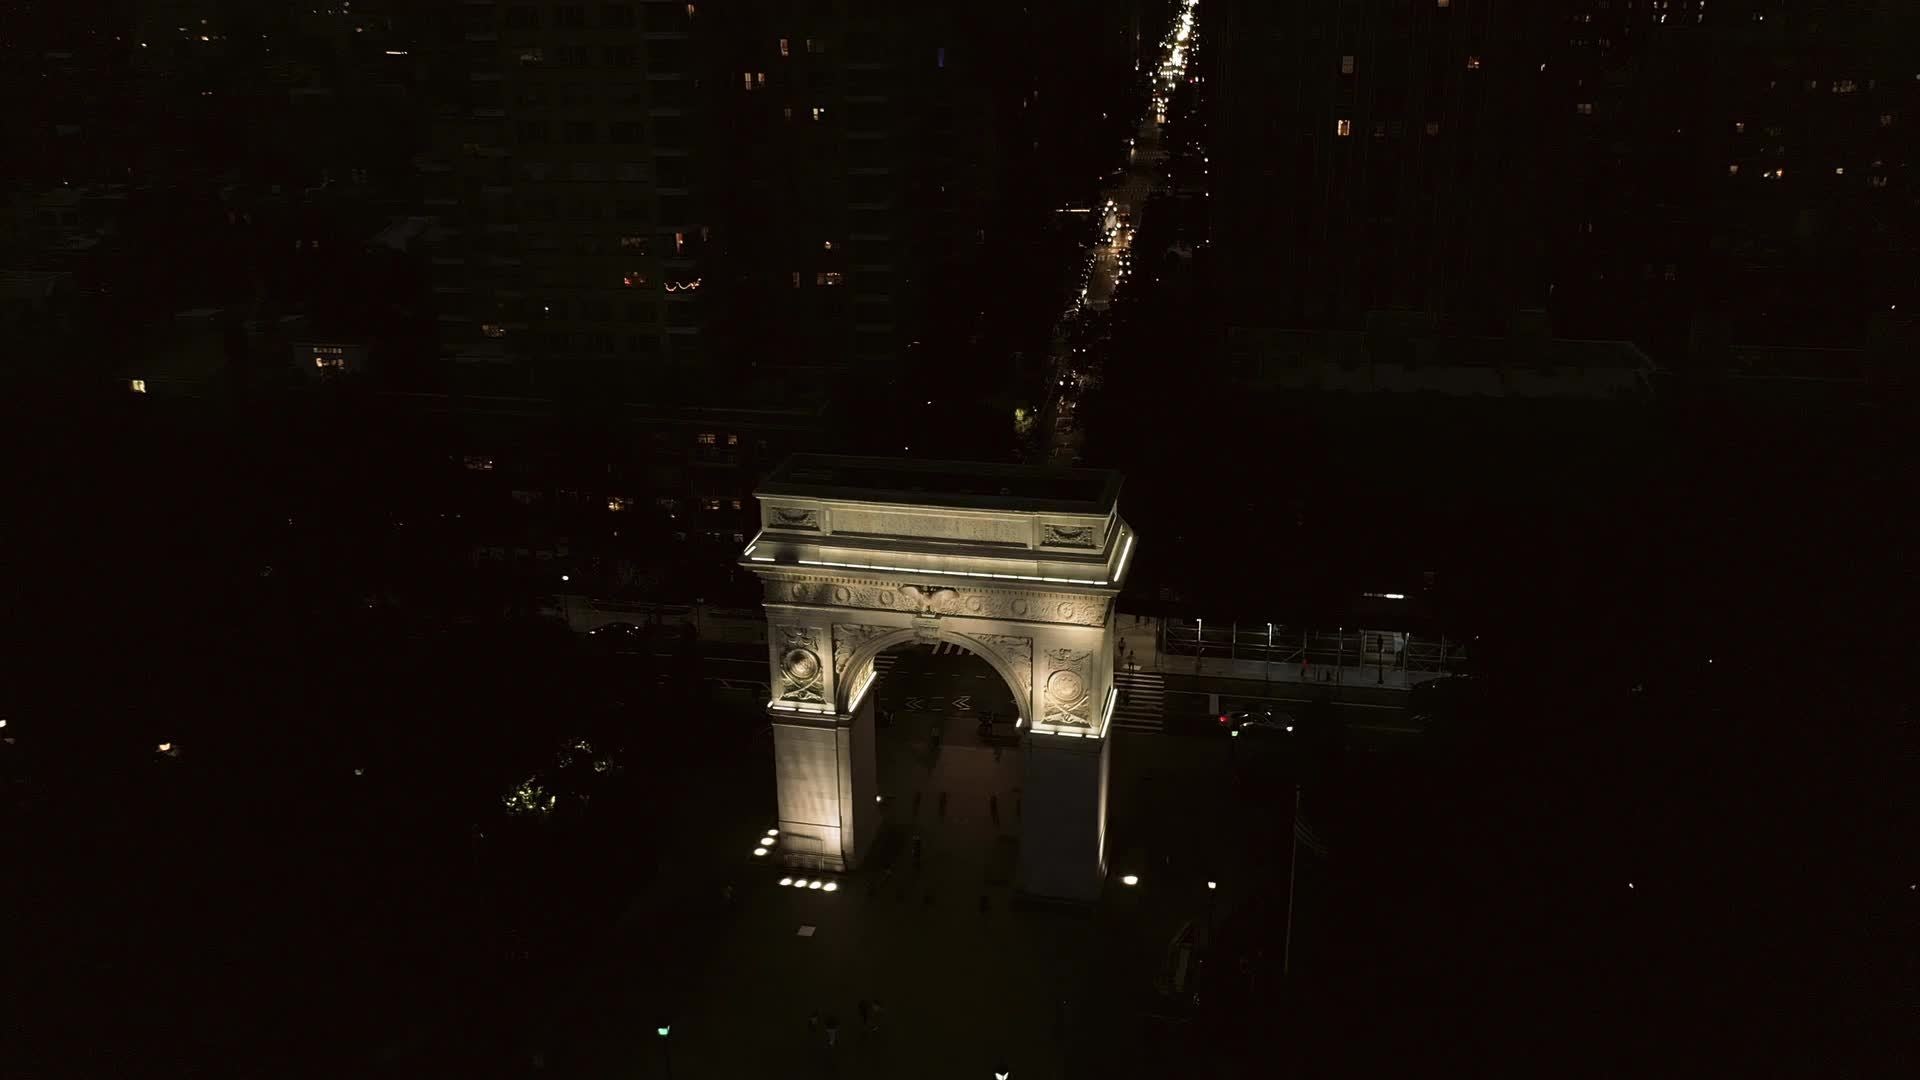 circling arch in Washington Square Park at night in New York City NYC